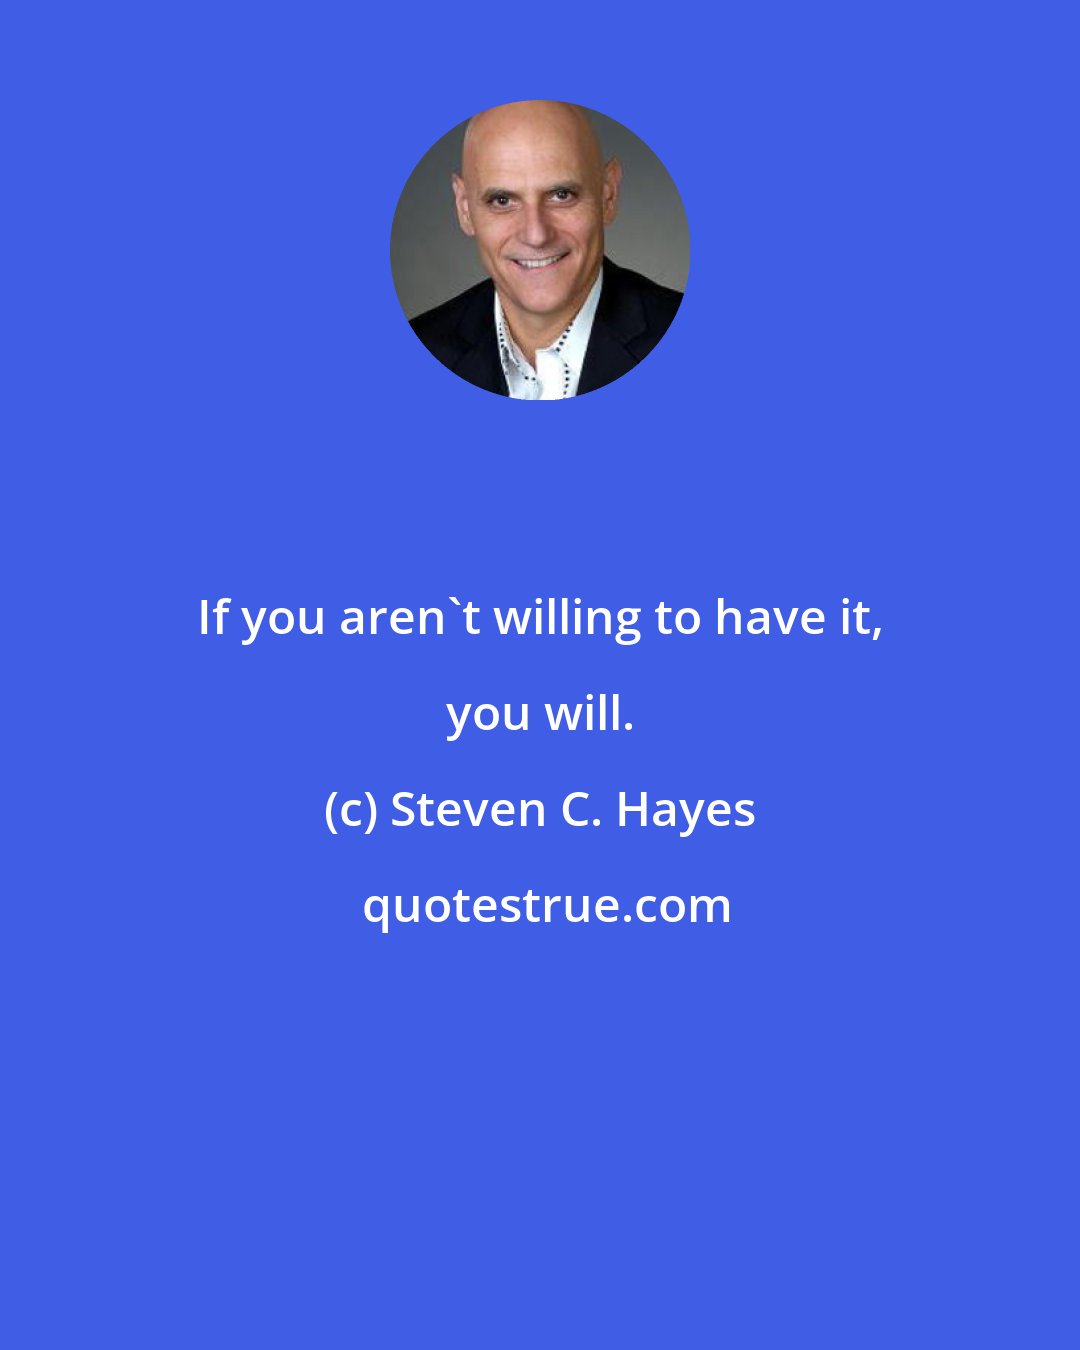 Steven C. Hayes: If you aren't willing to have it, you will.